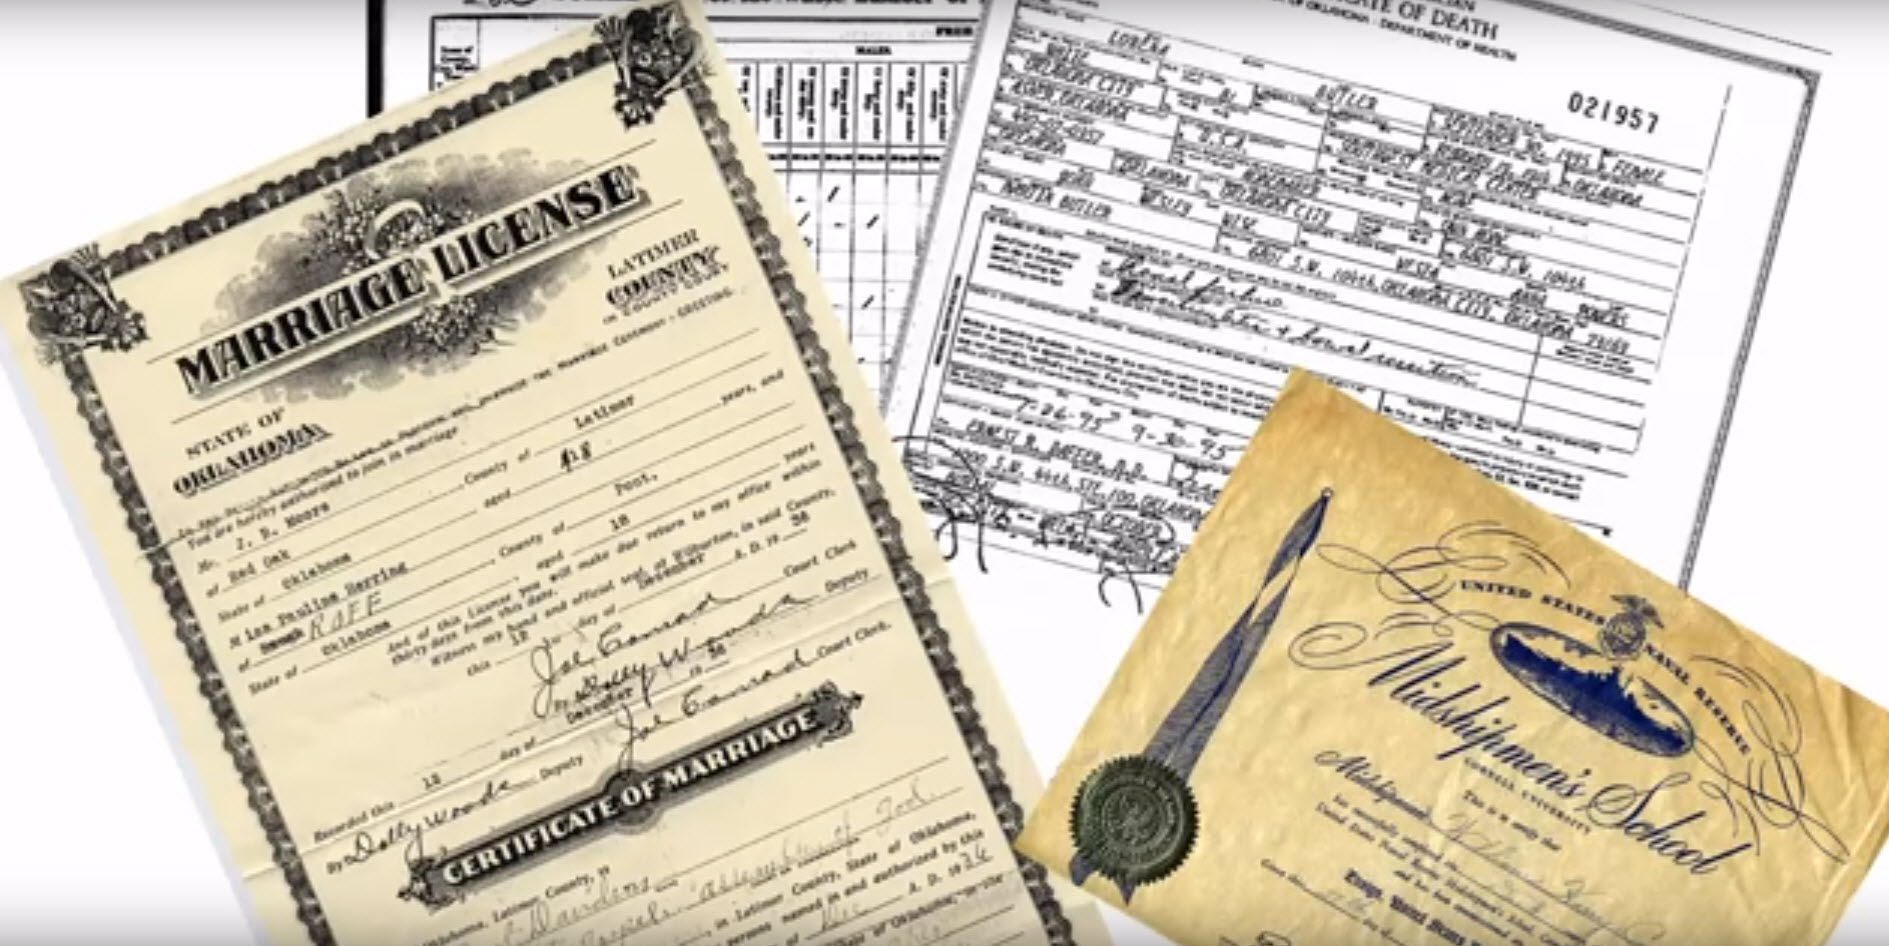 family history video documents applying to lineage societies